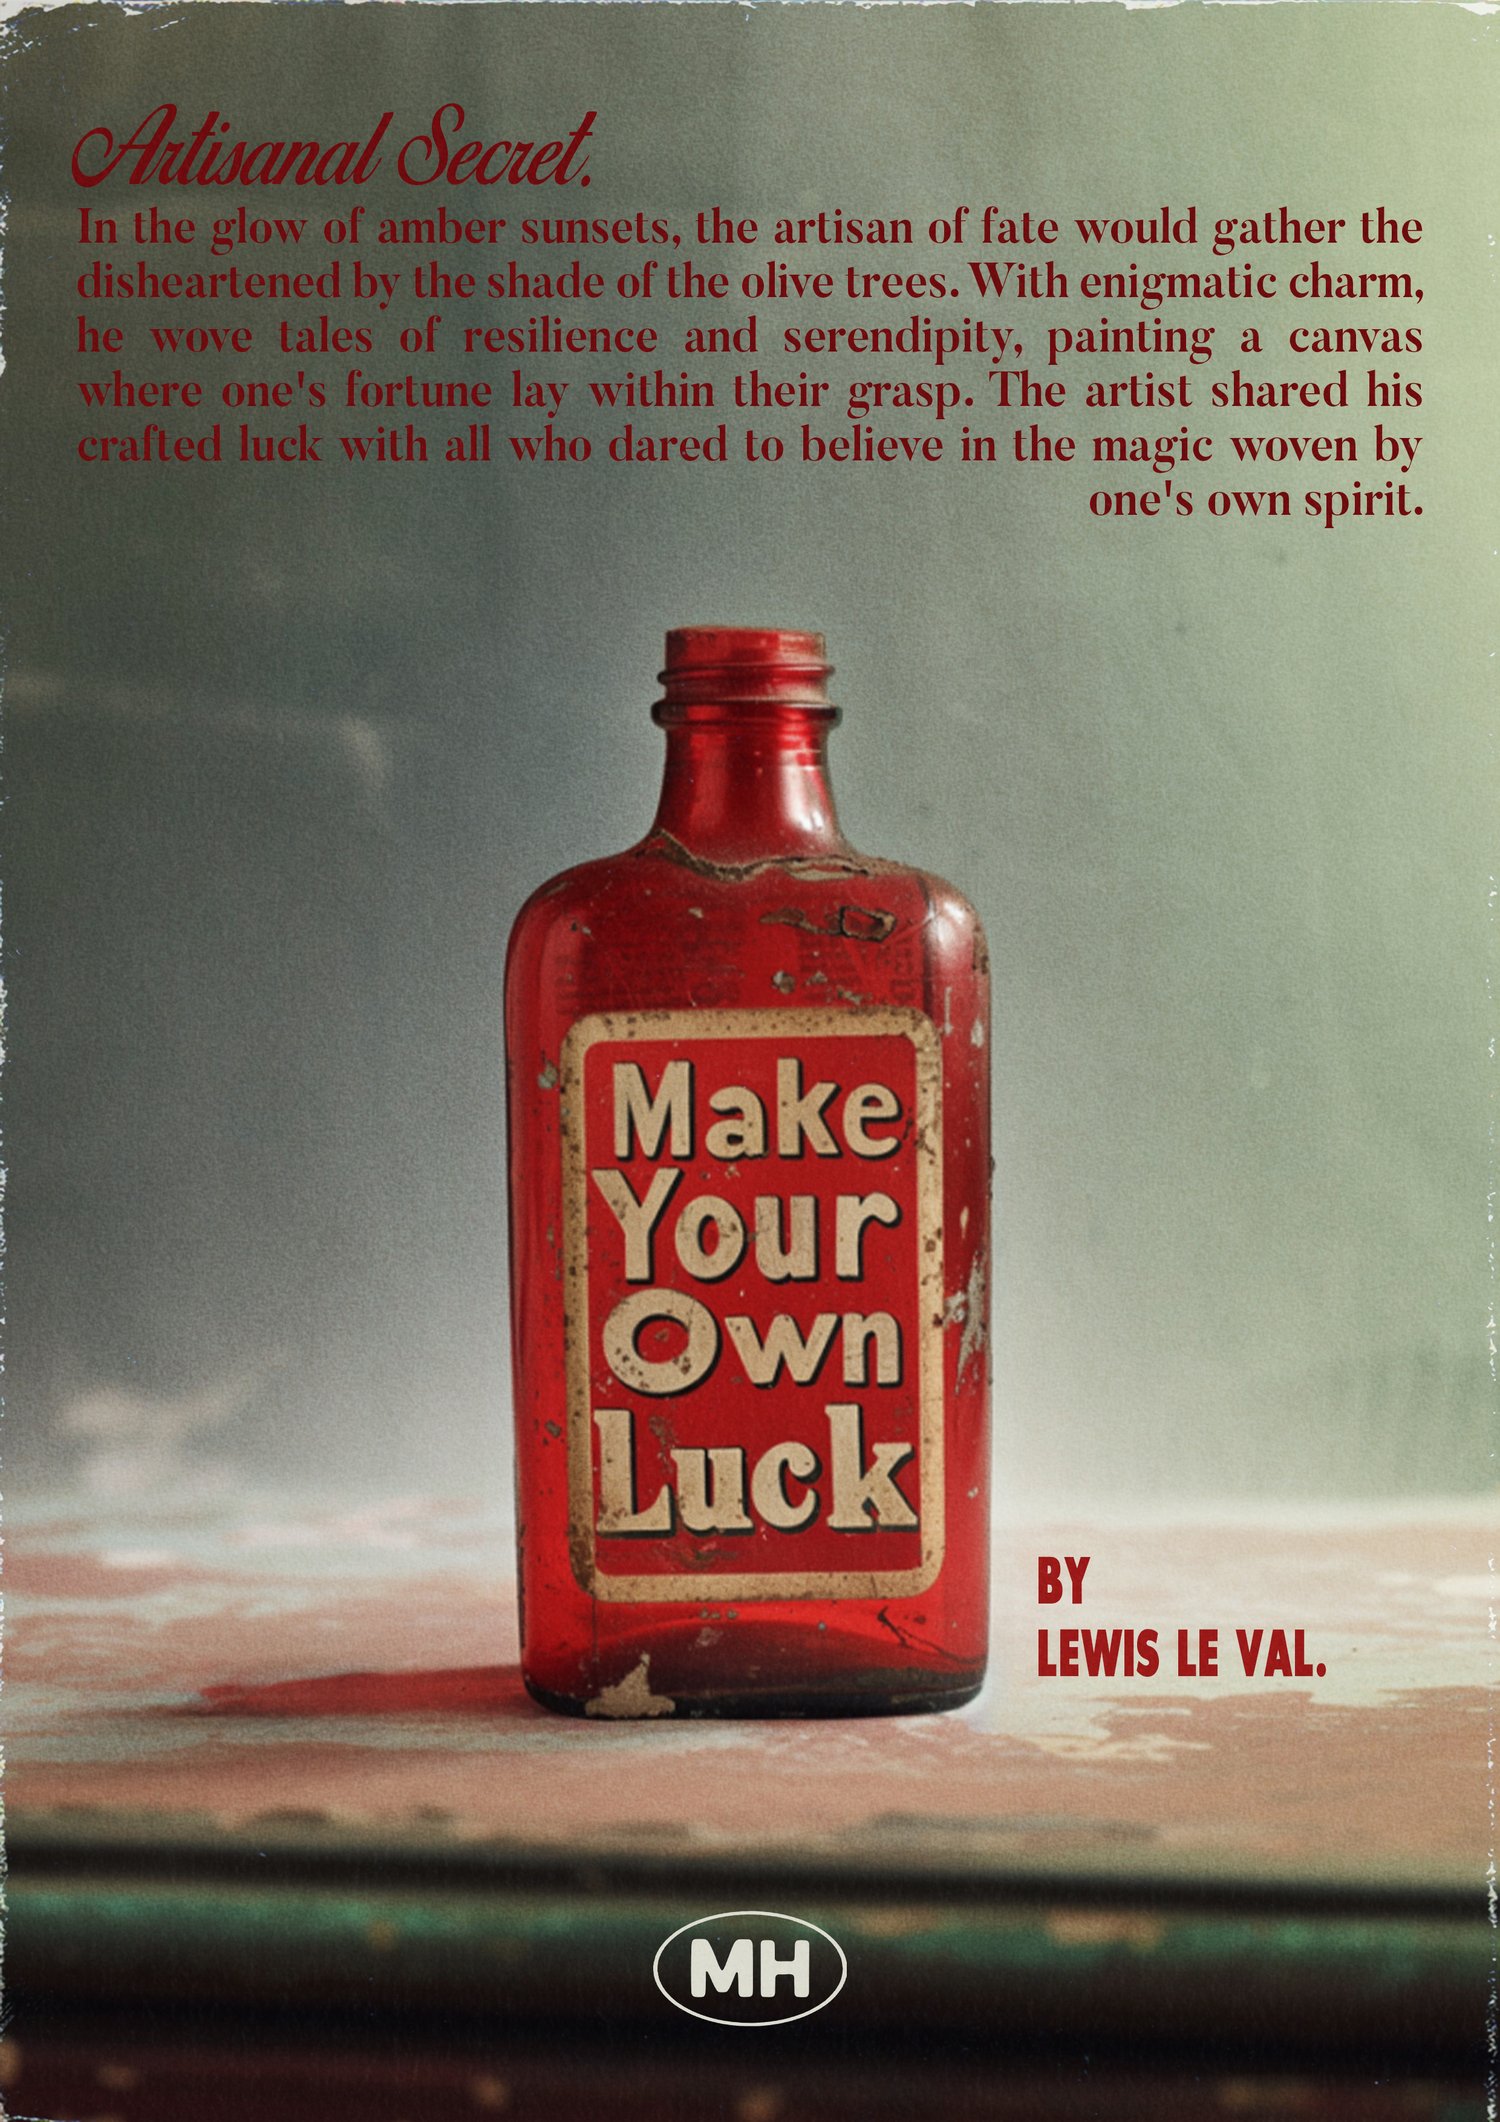 Lewis Le Val - Make Your Own Luck